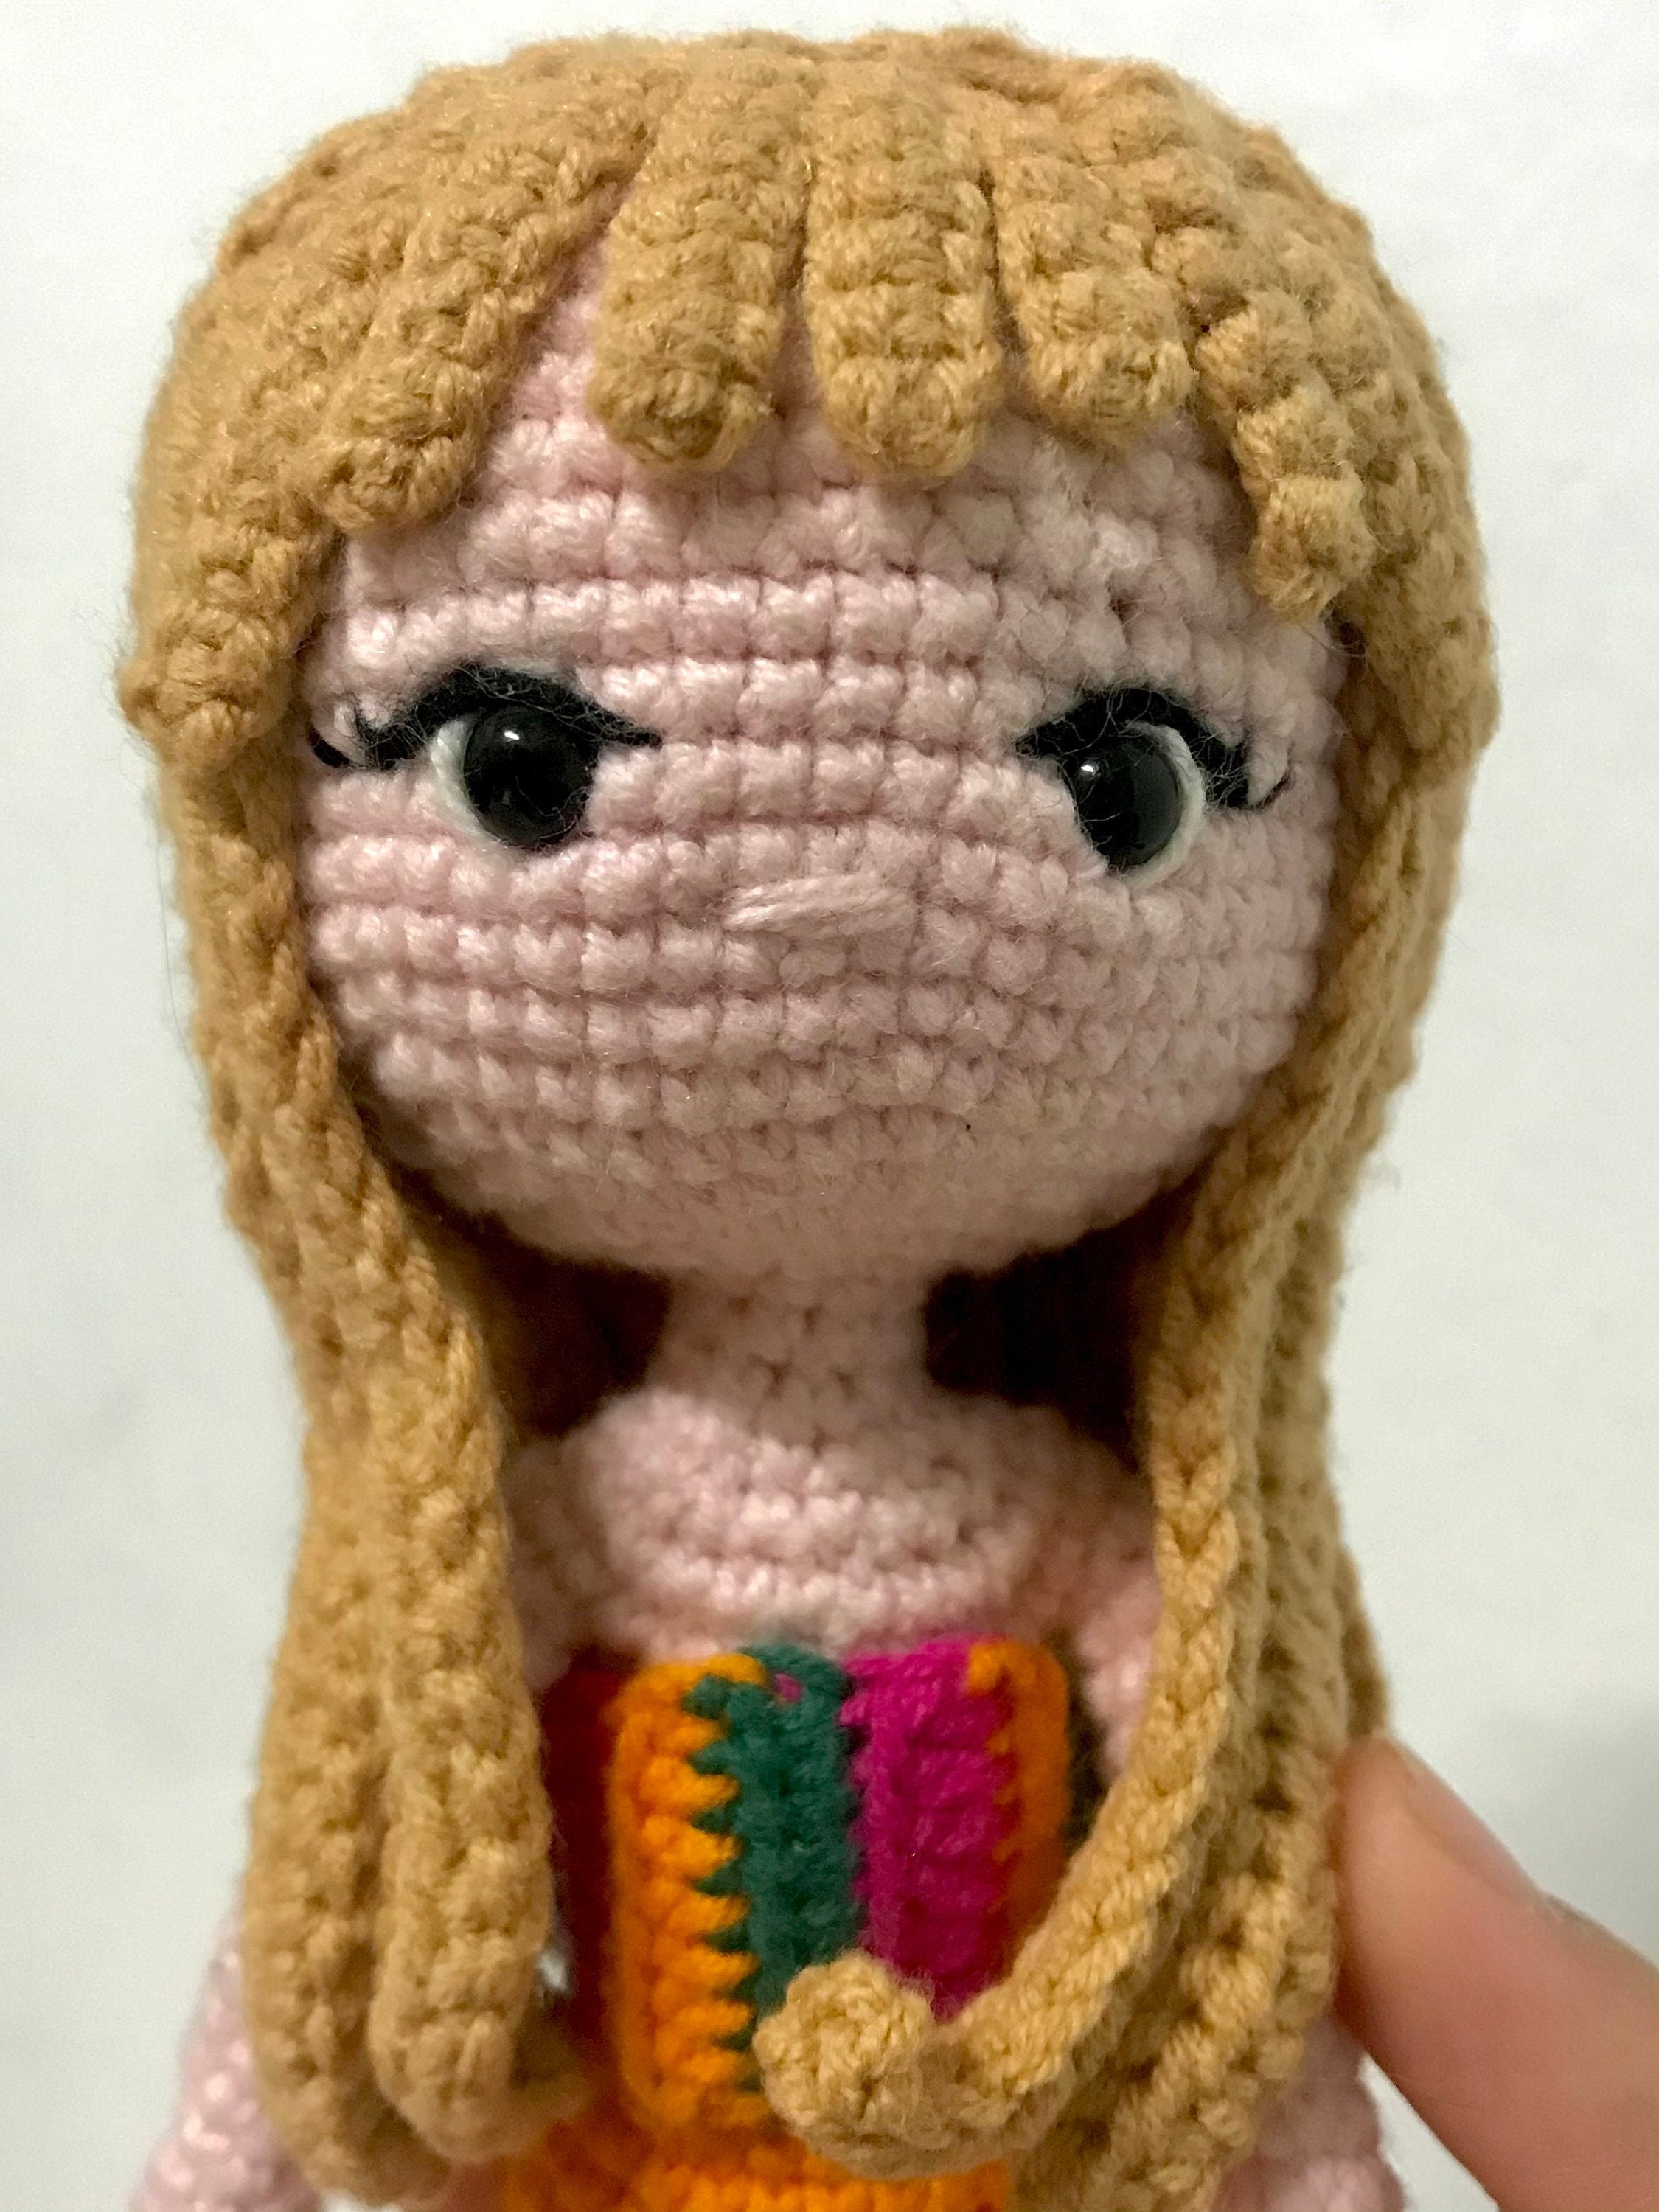 Taylor Swift Crochet Doll, Taylor Swift Fan Collectibles Gift